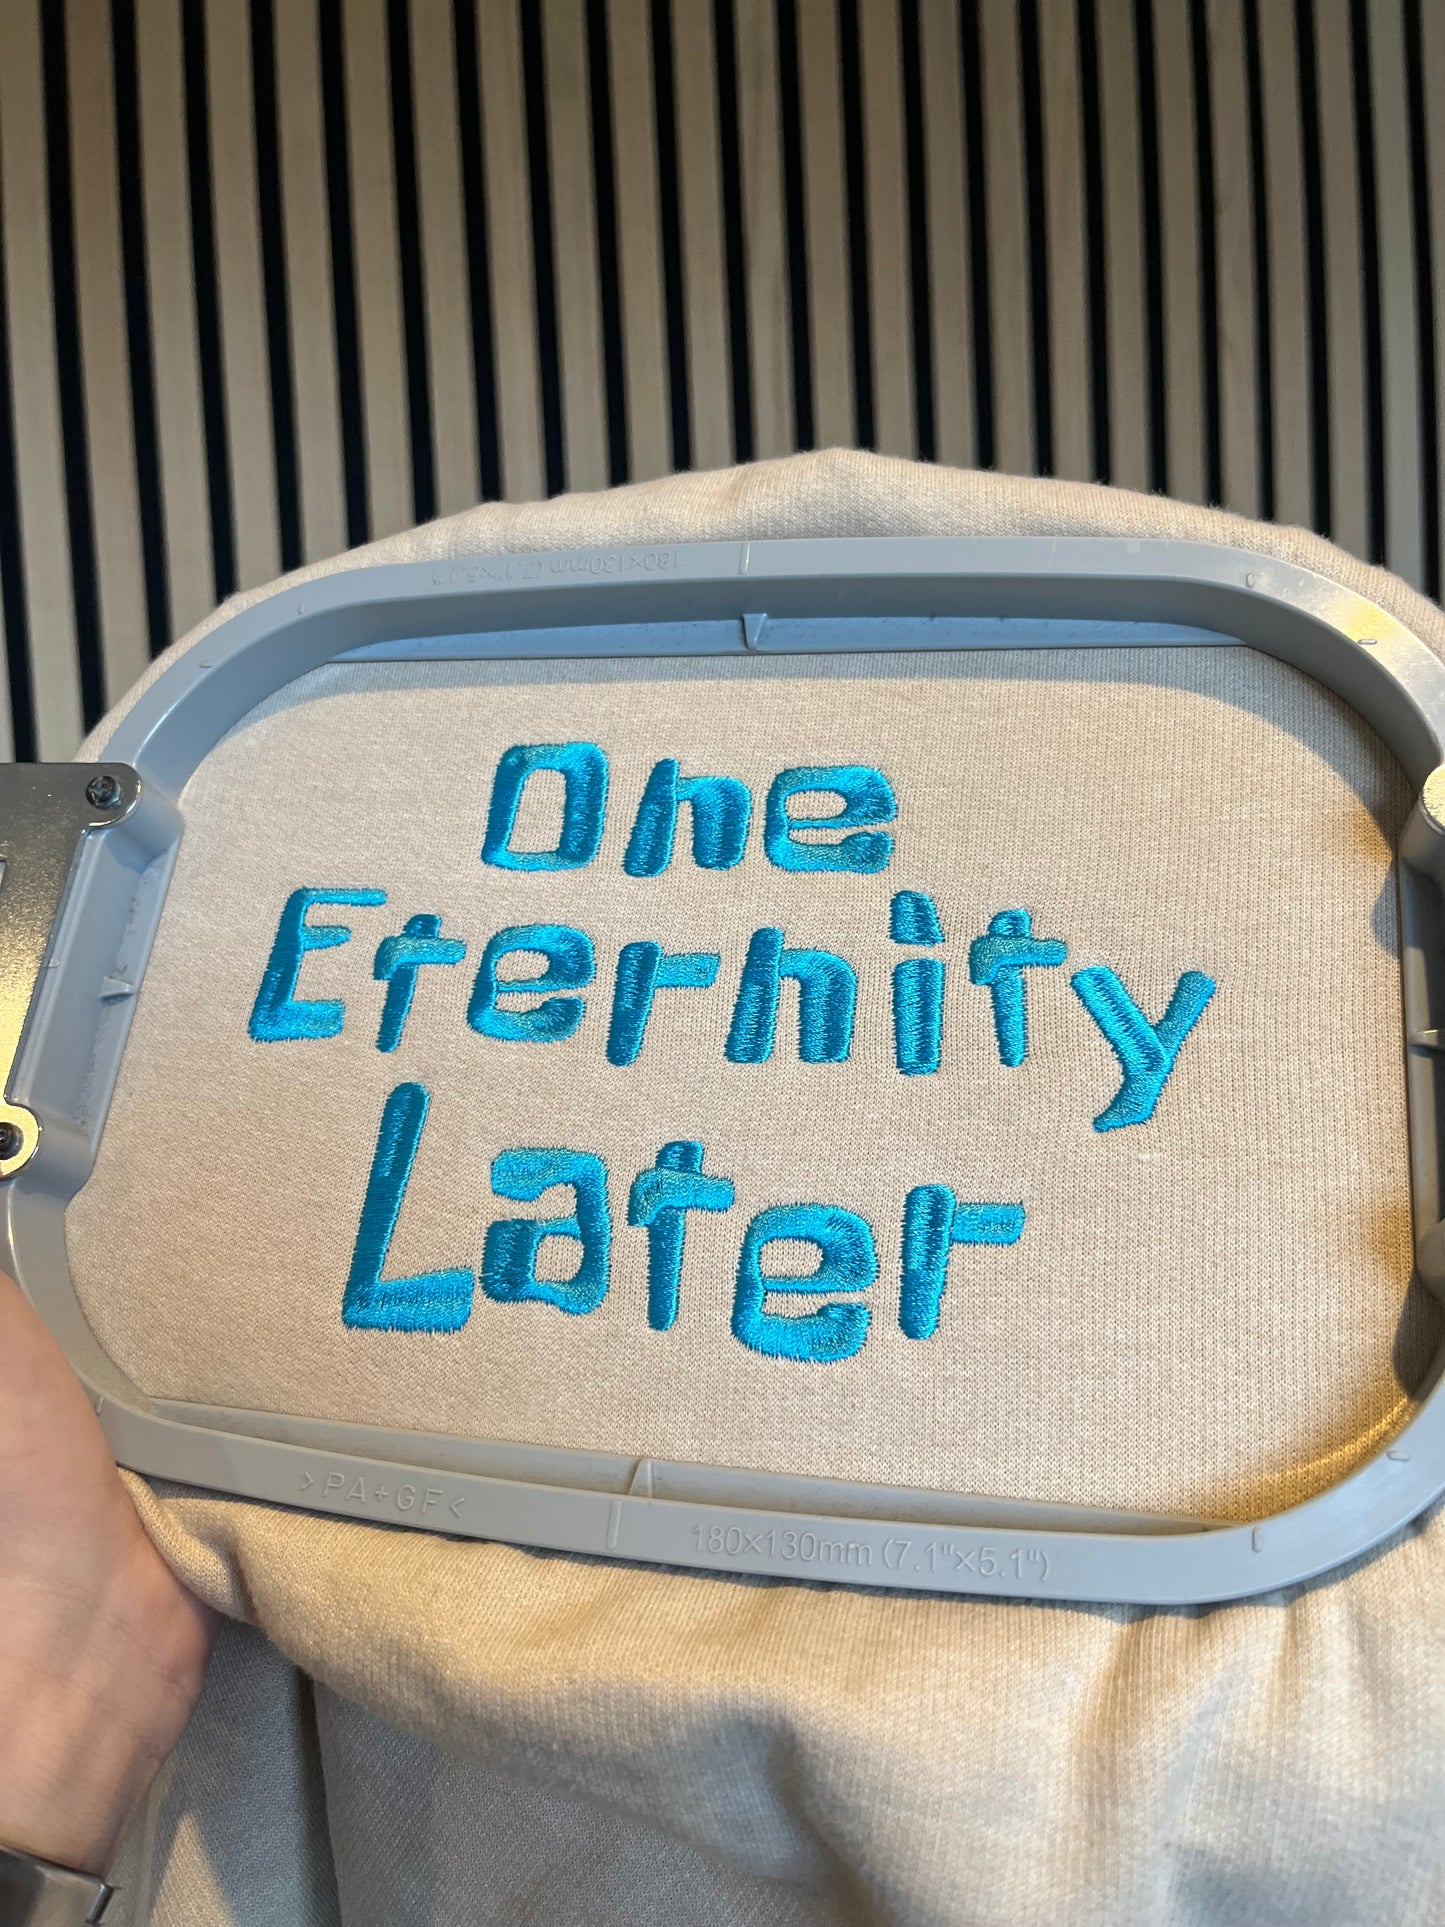 One Eternity Later Embroidered Sweatshirt